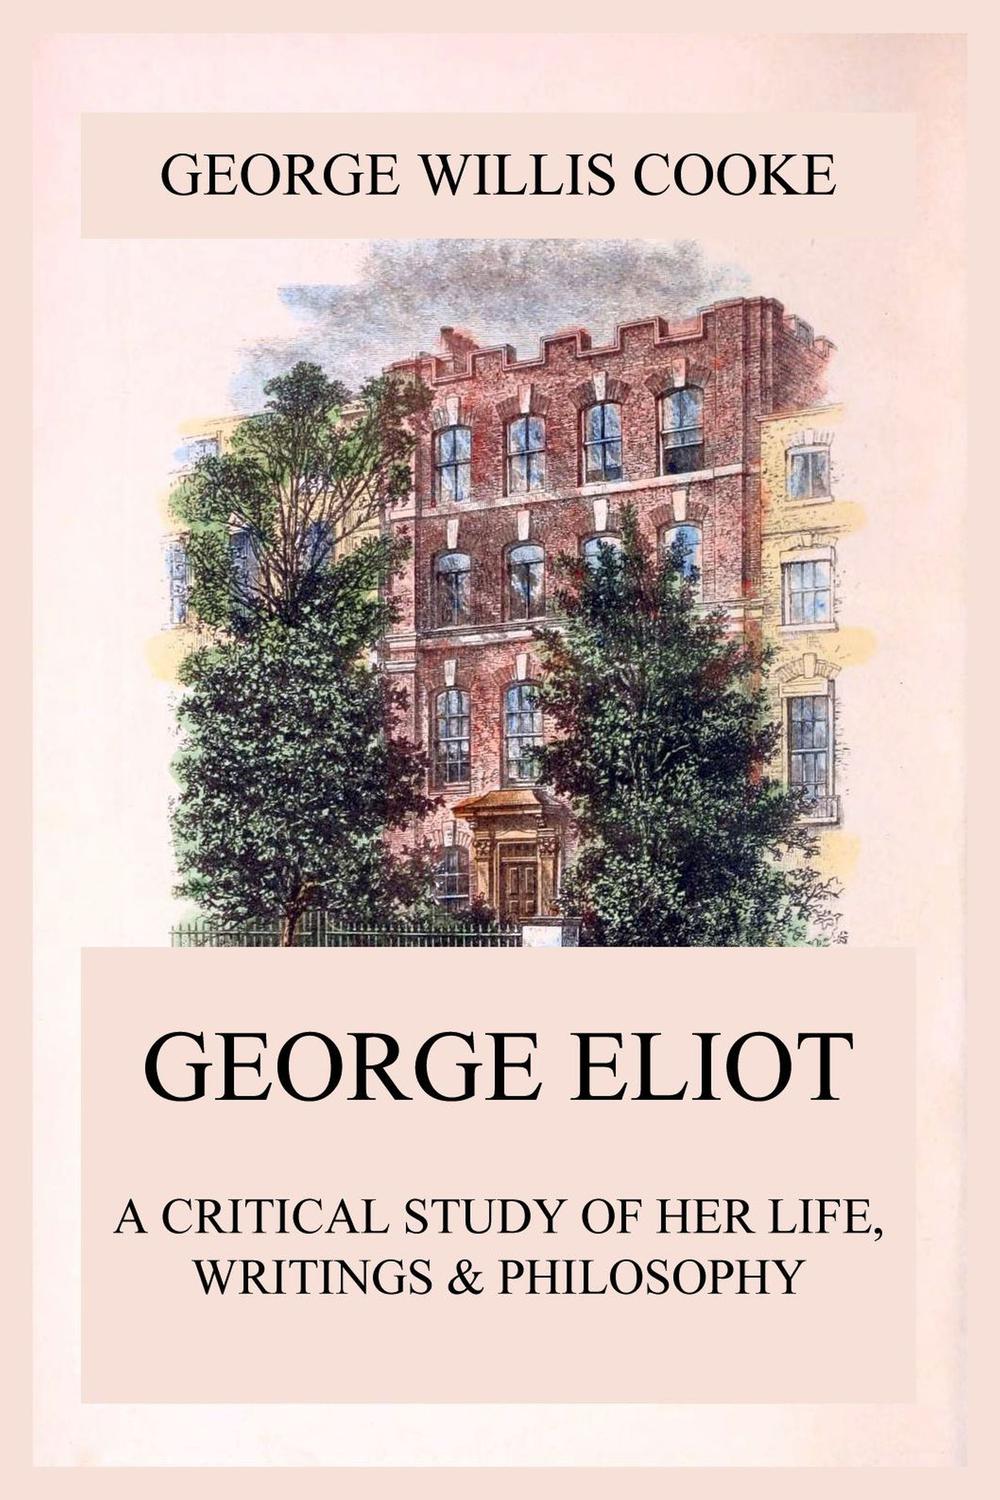 George Eliot; A Critical Study of Her Life, Writings & Philosophy - George Willis Cooke,,